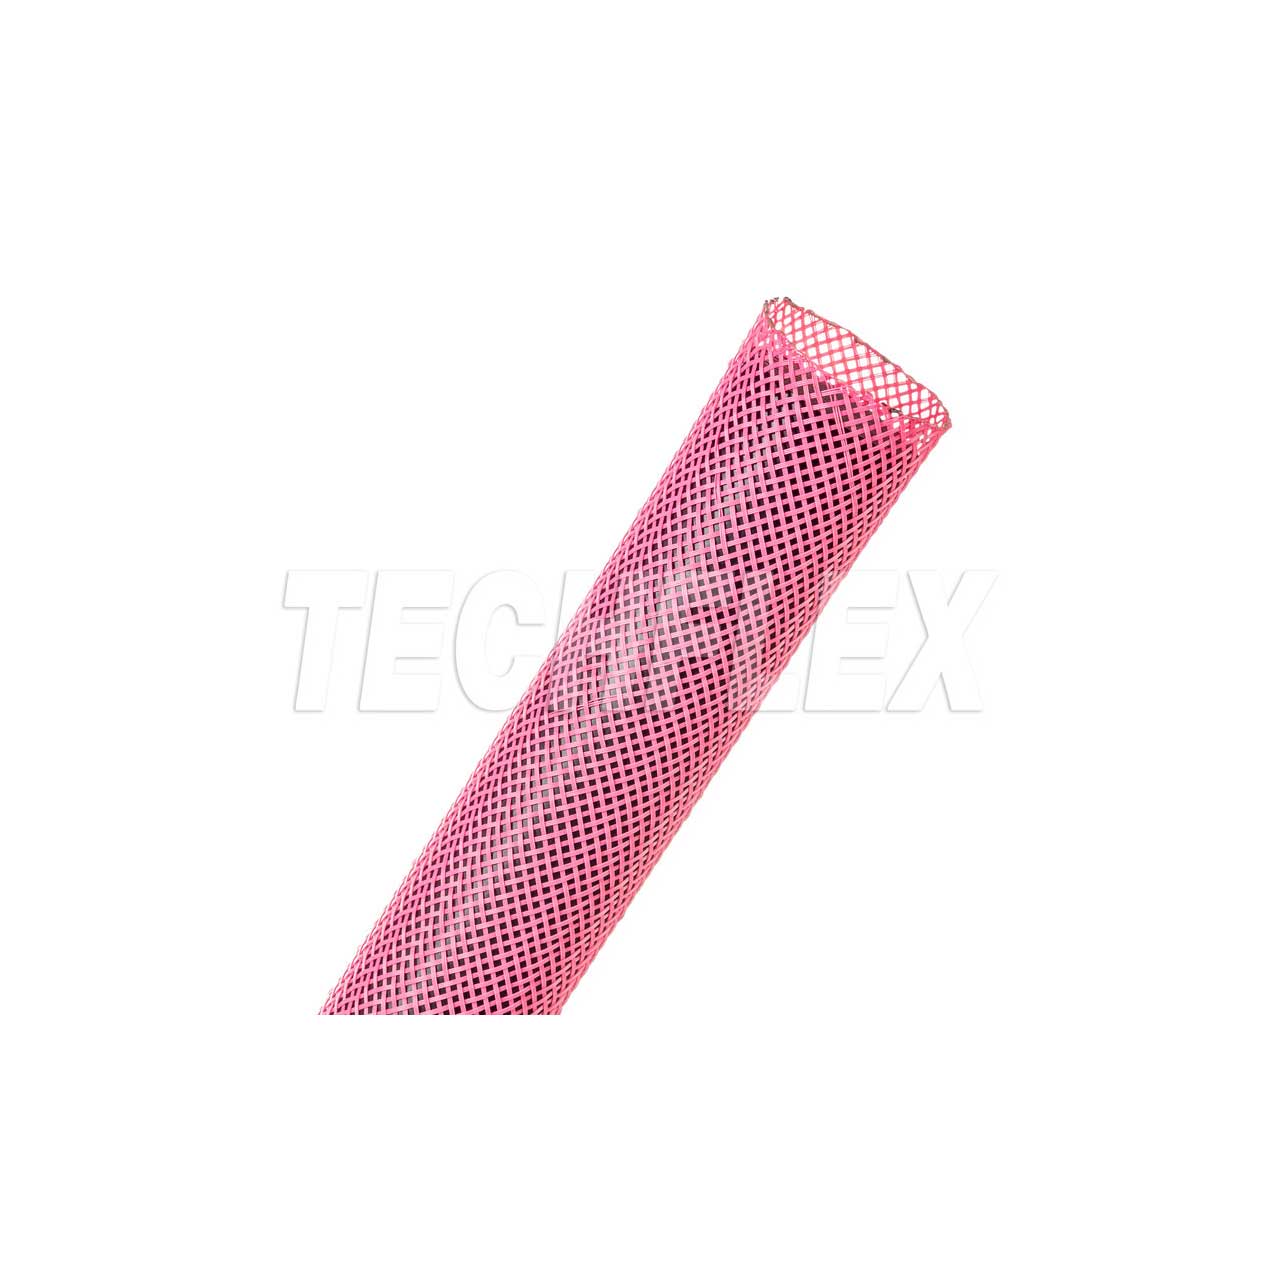 Techflex PTN1.00NP General Purpose Expandable Braided Cable Sleeving - 1 Inch - Neon Pink - 250 Foot PTN1.00NP 250 FOOT